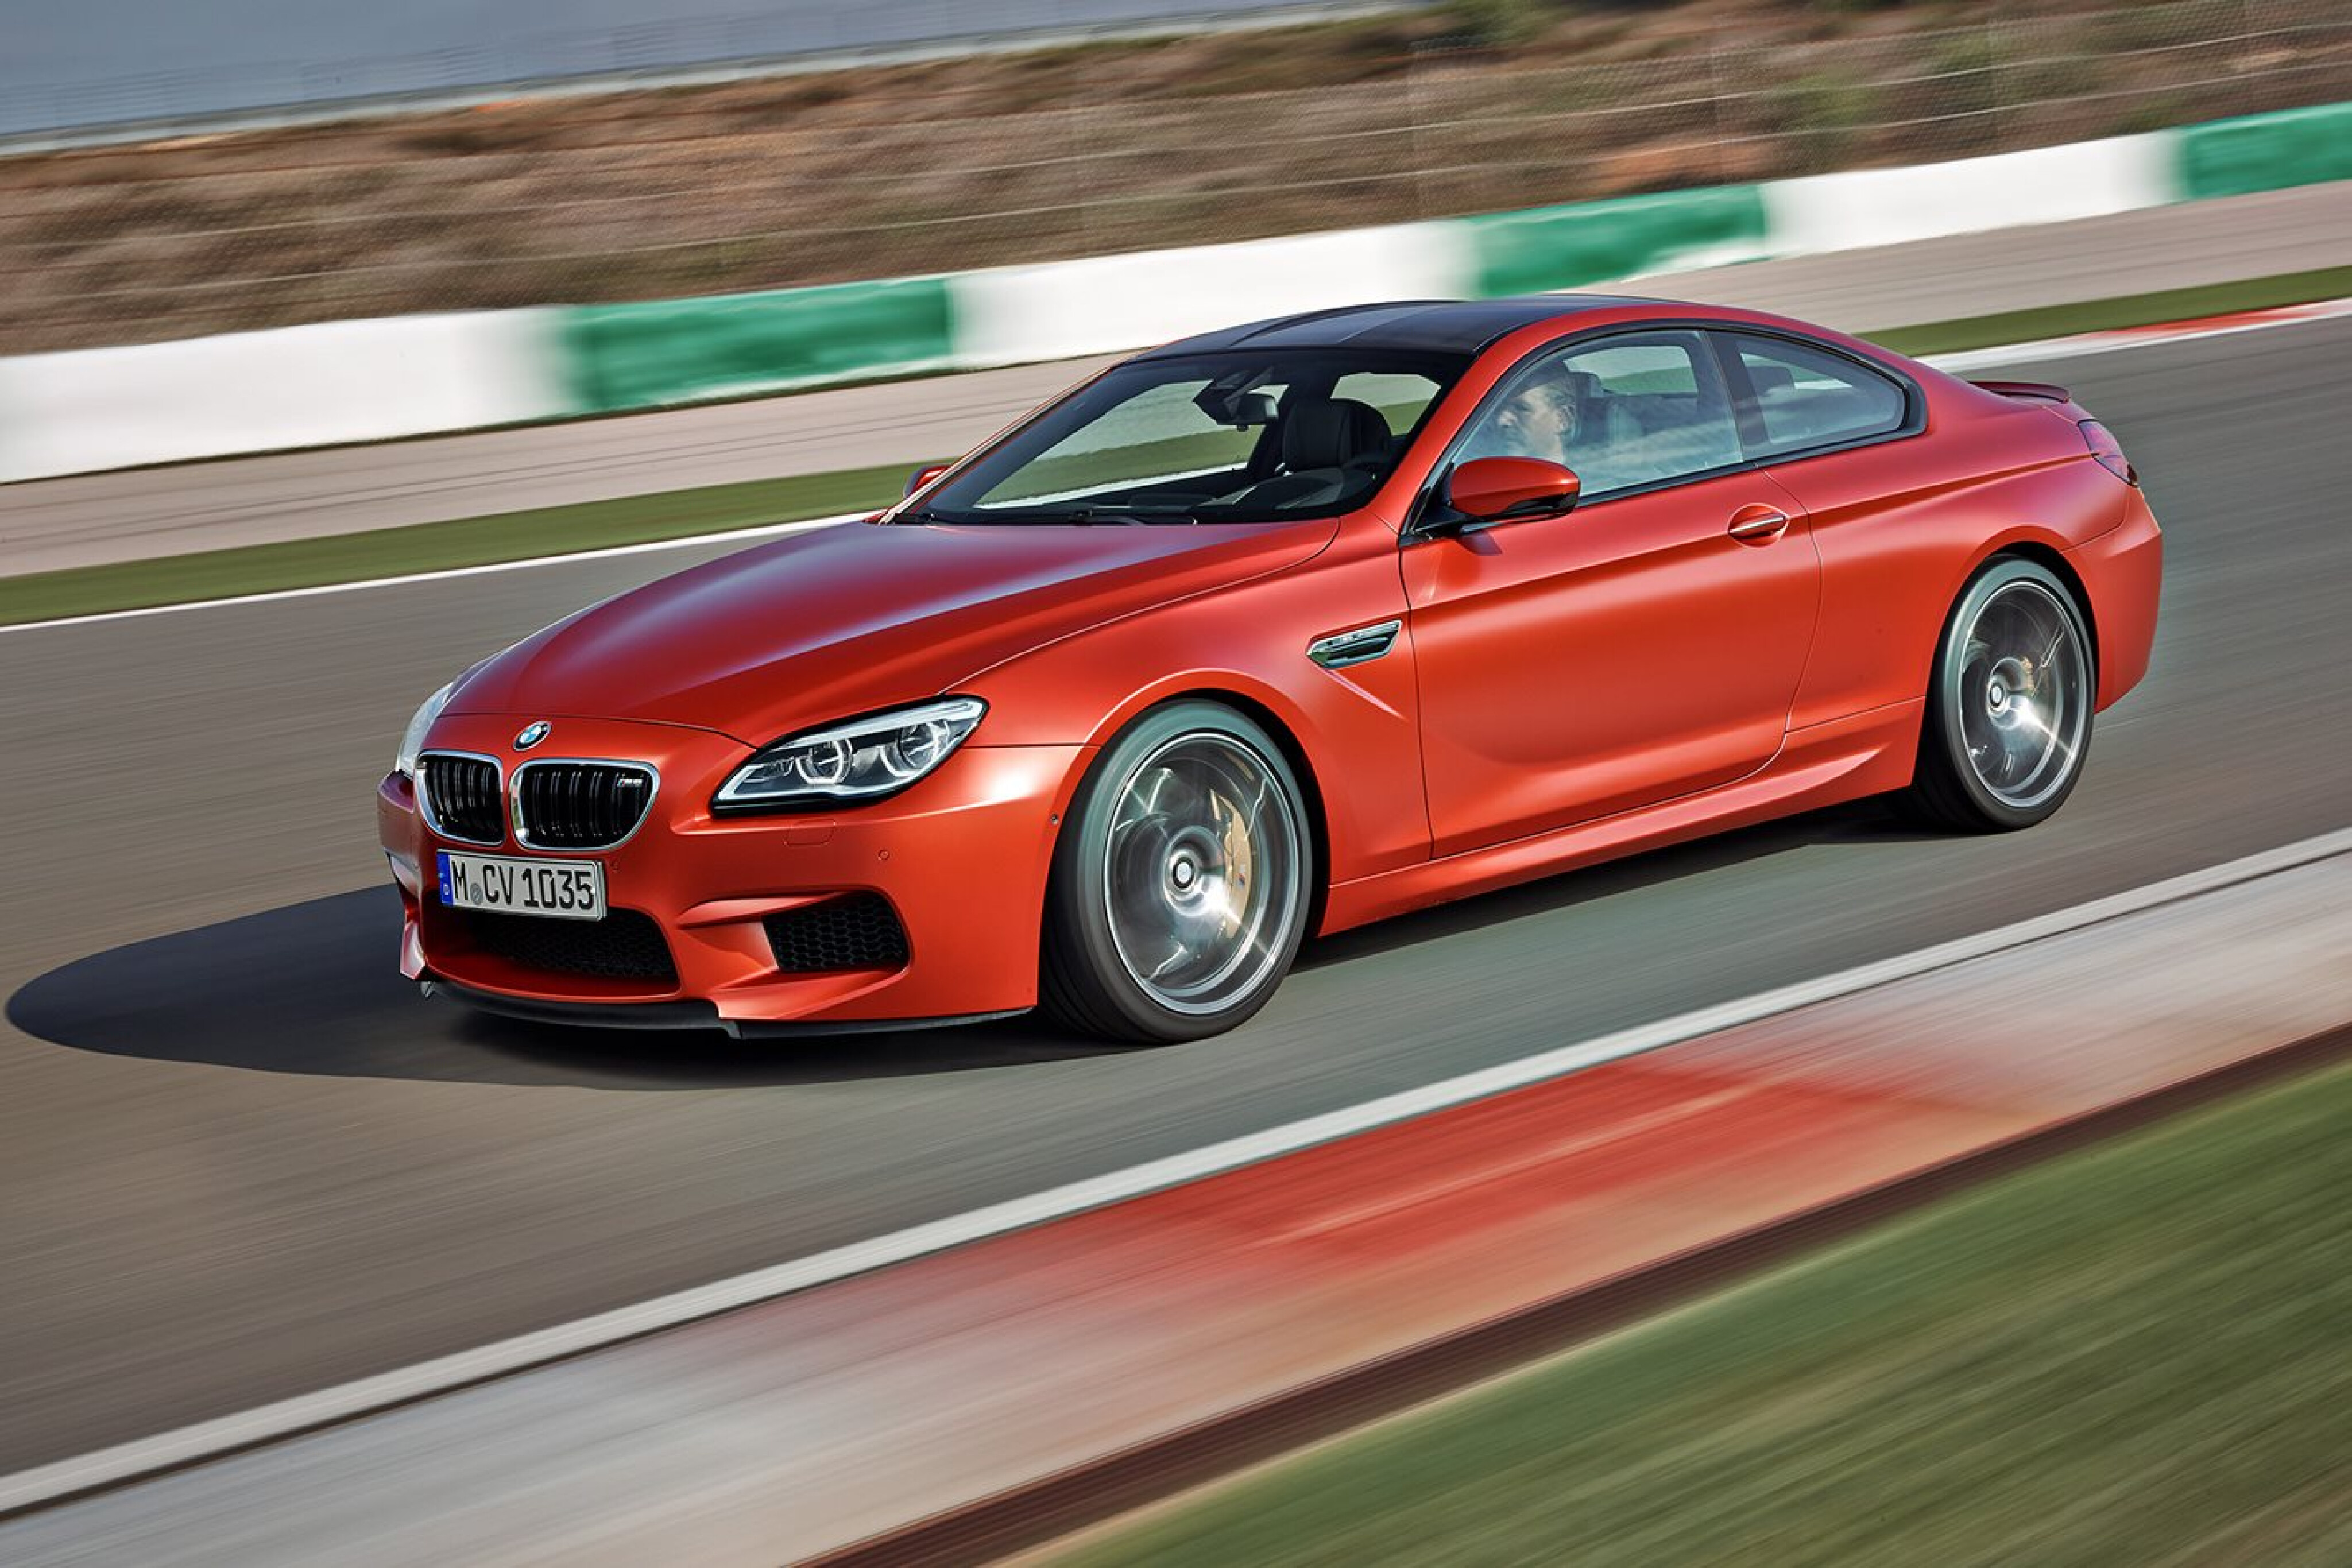 c2c50a2a/bmw m6 coupe snackable review jpg